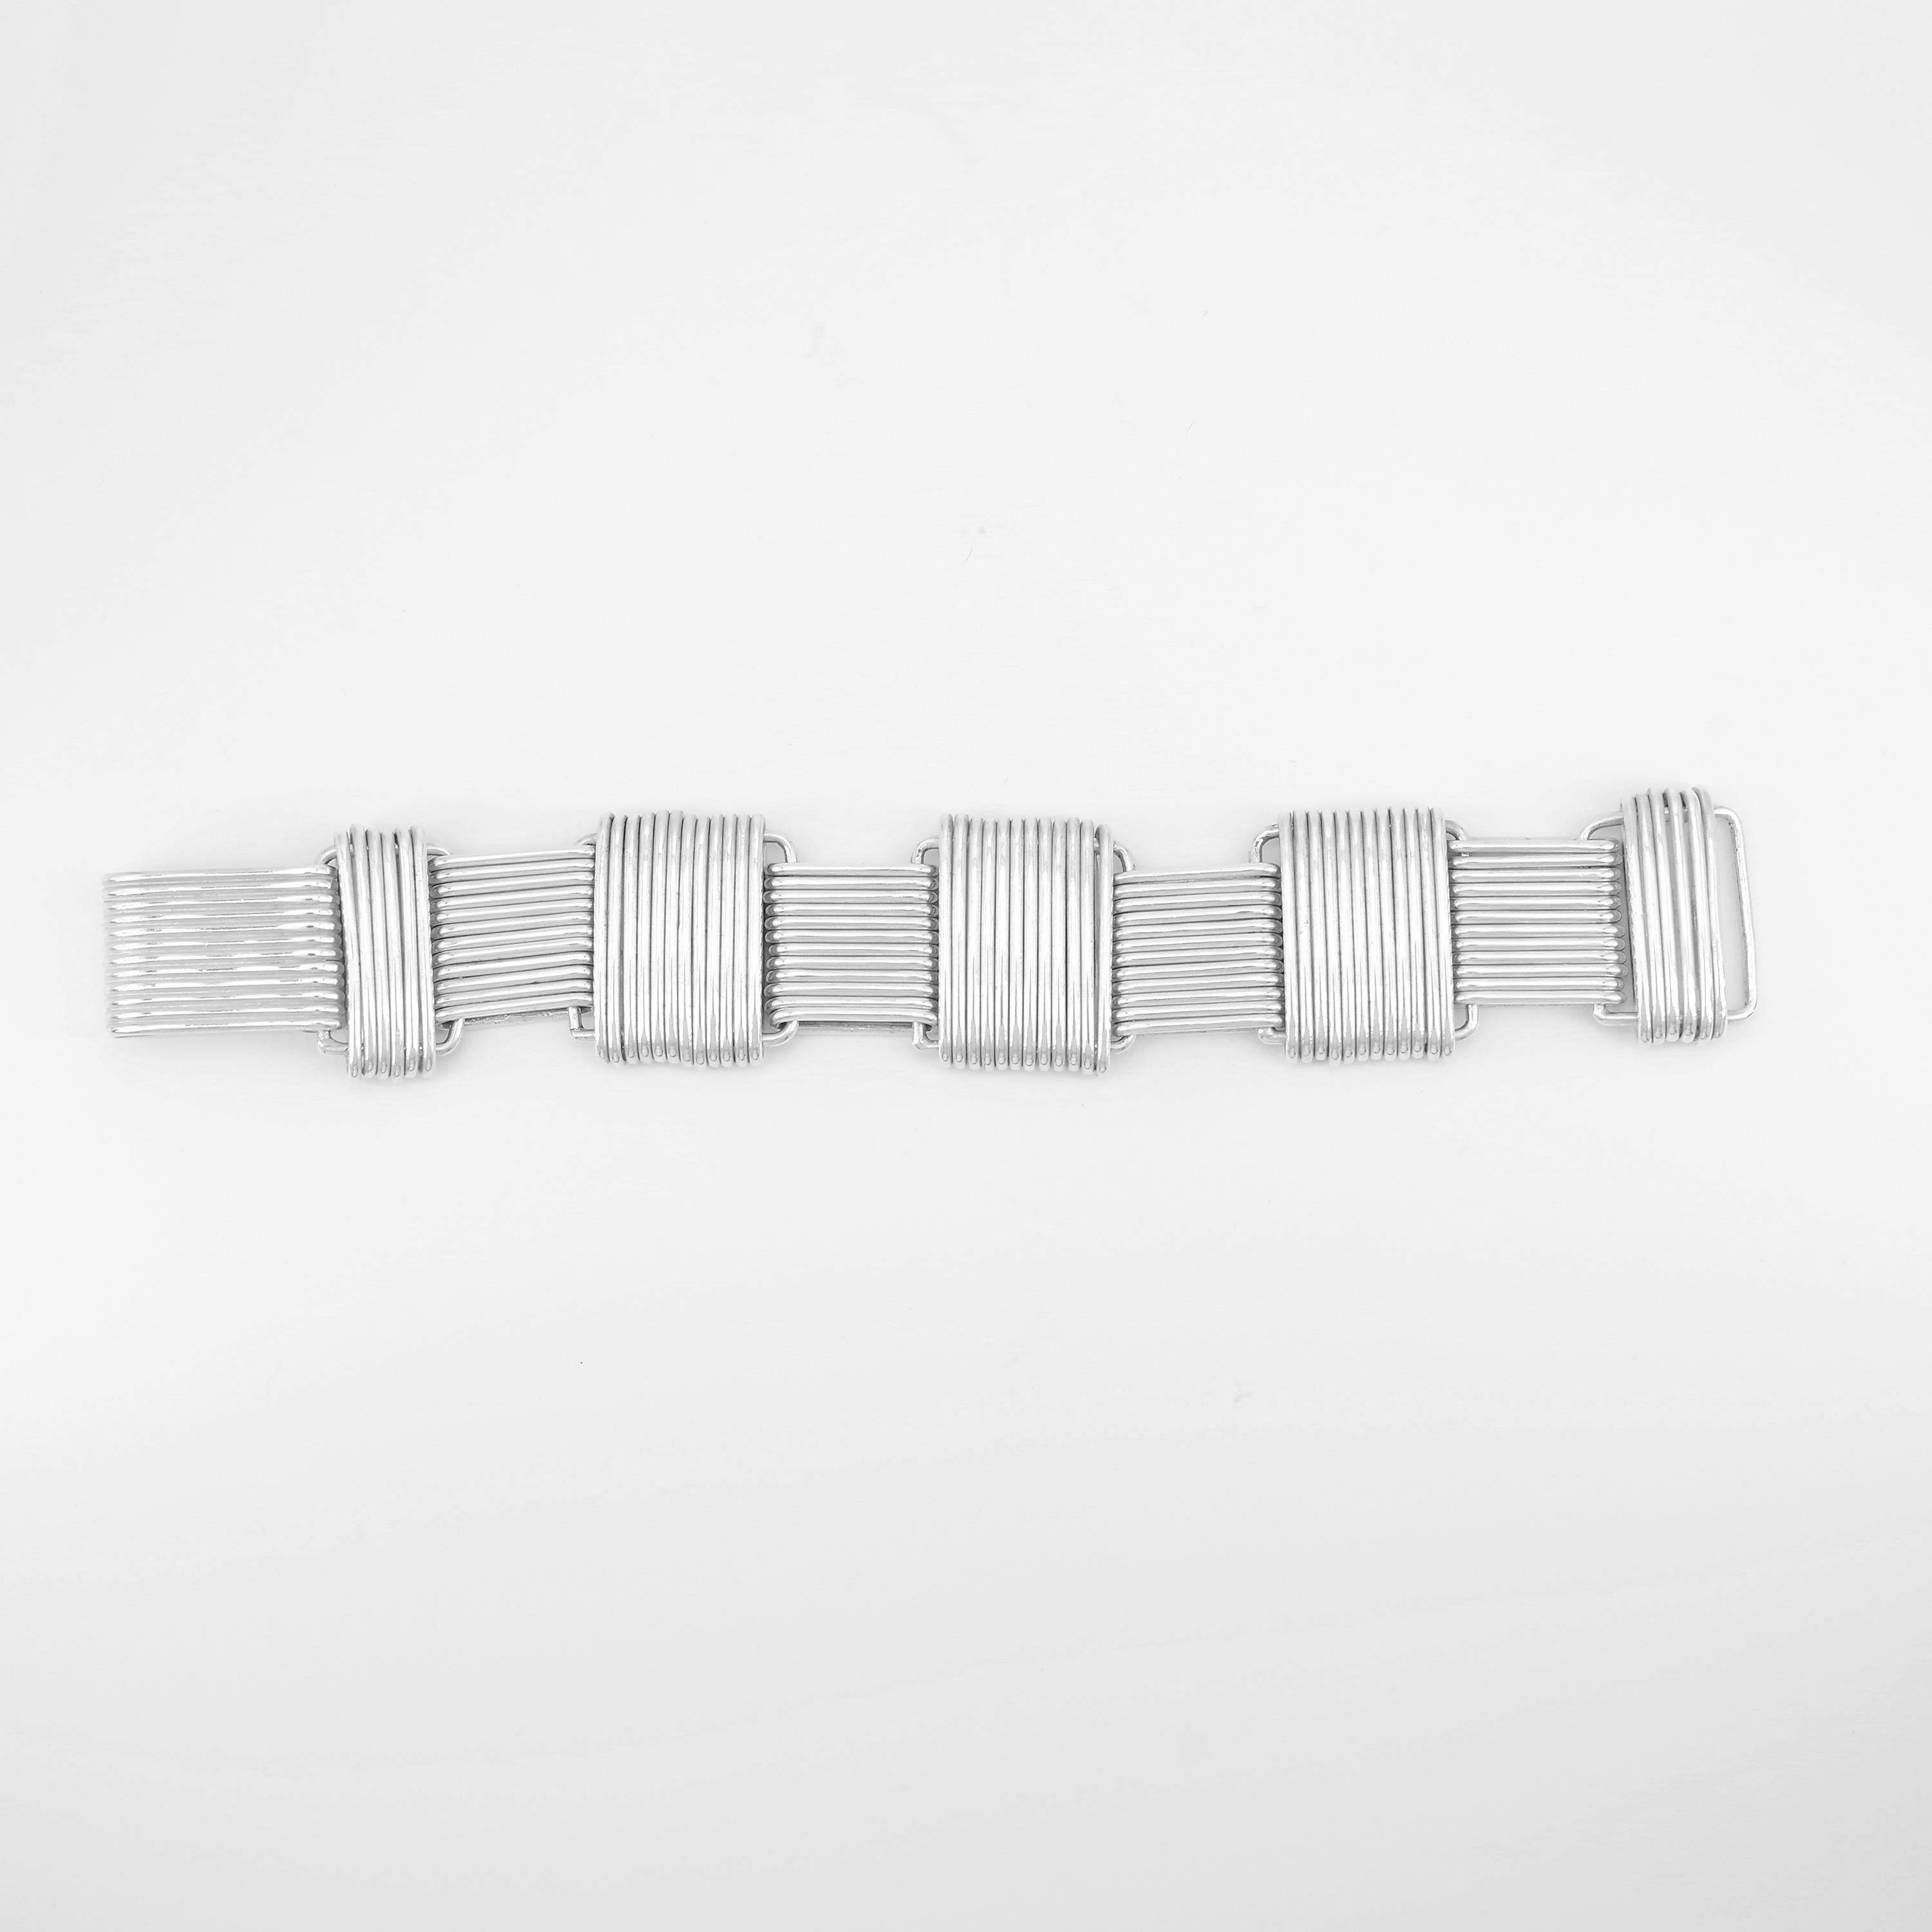 If you have even a slight interest in the jewelry created during the Mexican Modernist movement, this bracelet may well look familiar to you. Hector Aguilar created this bracelet in the 1940s and it has since become an iconic piece from the